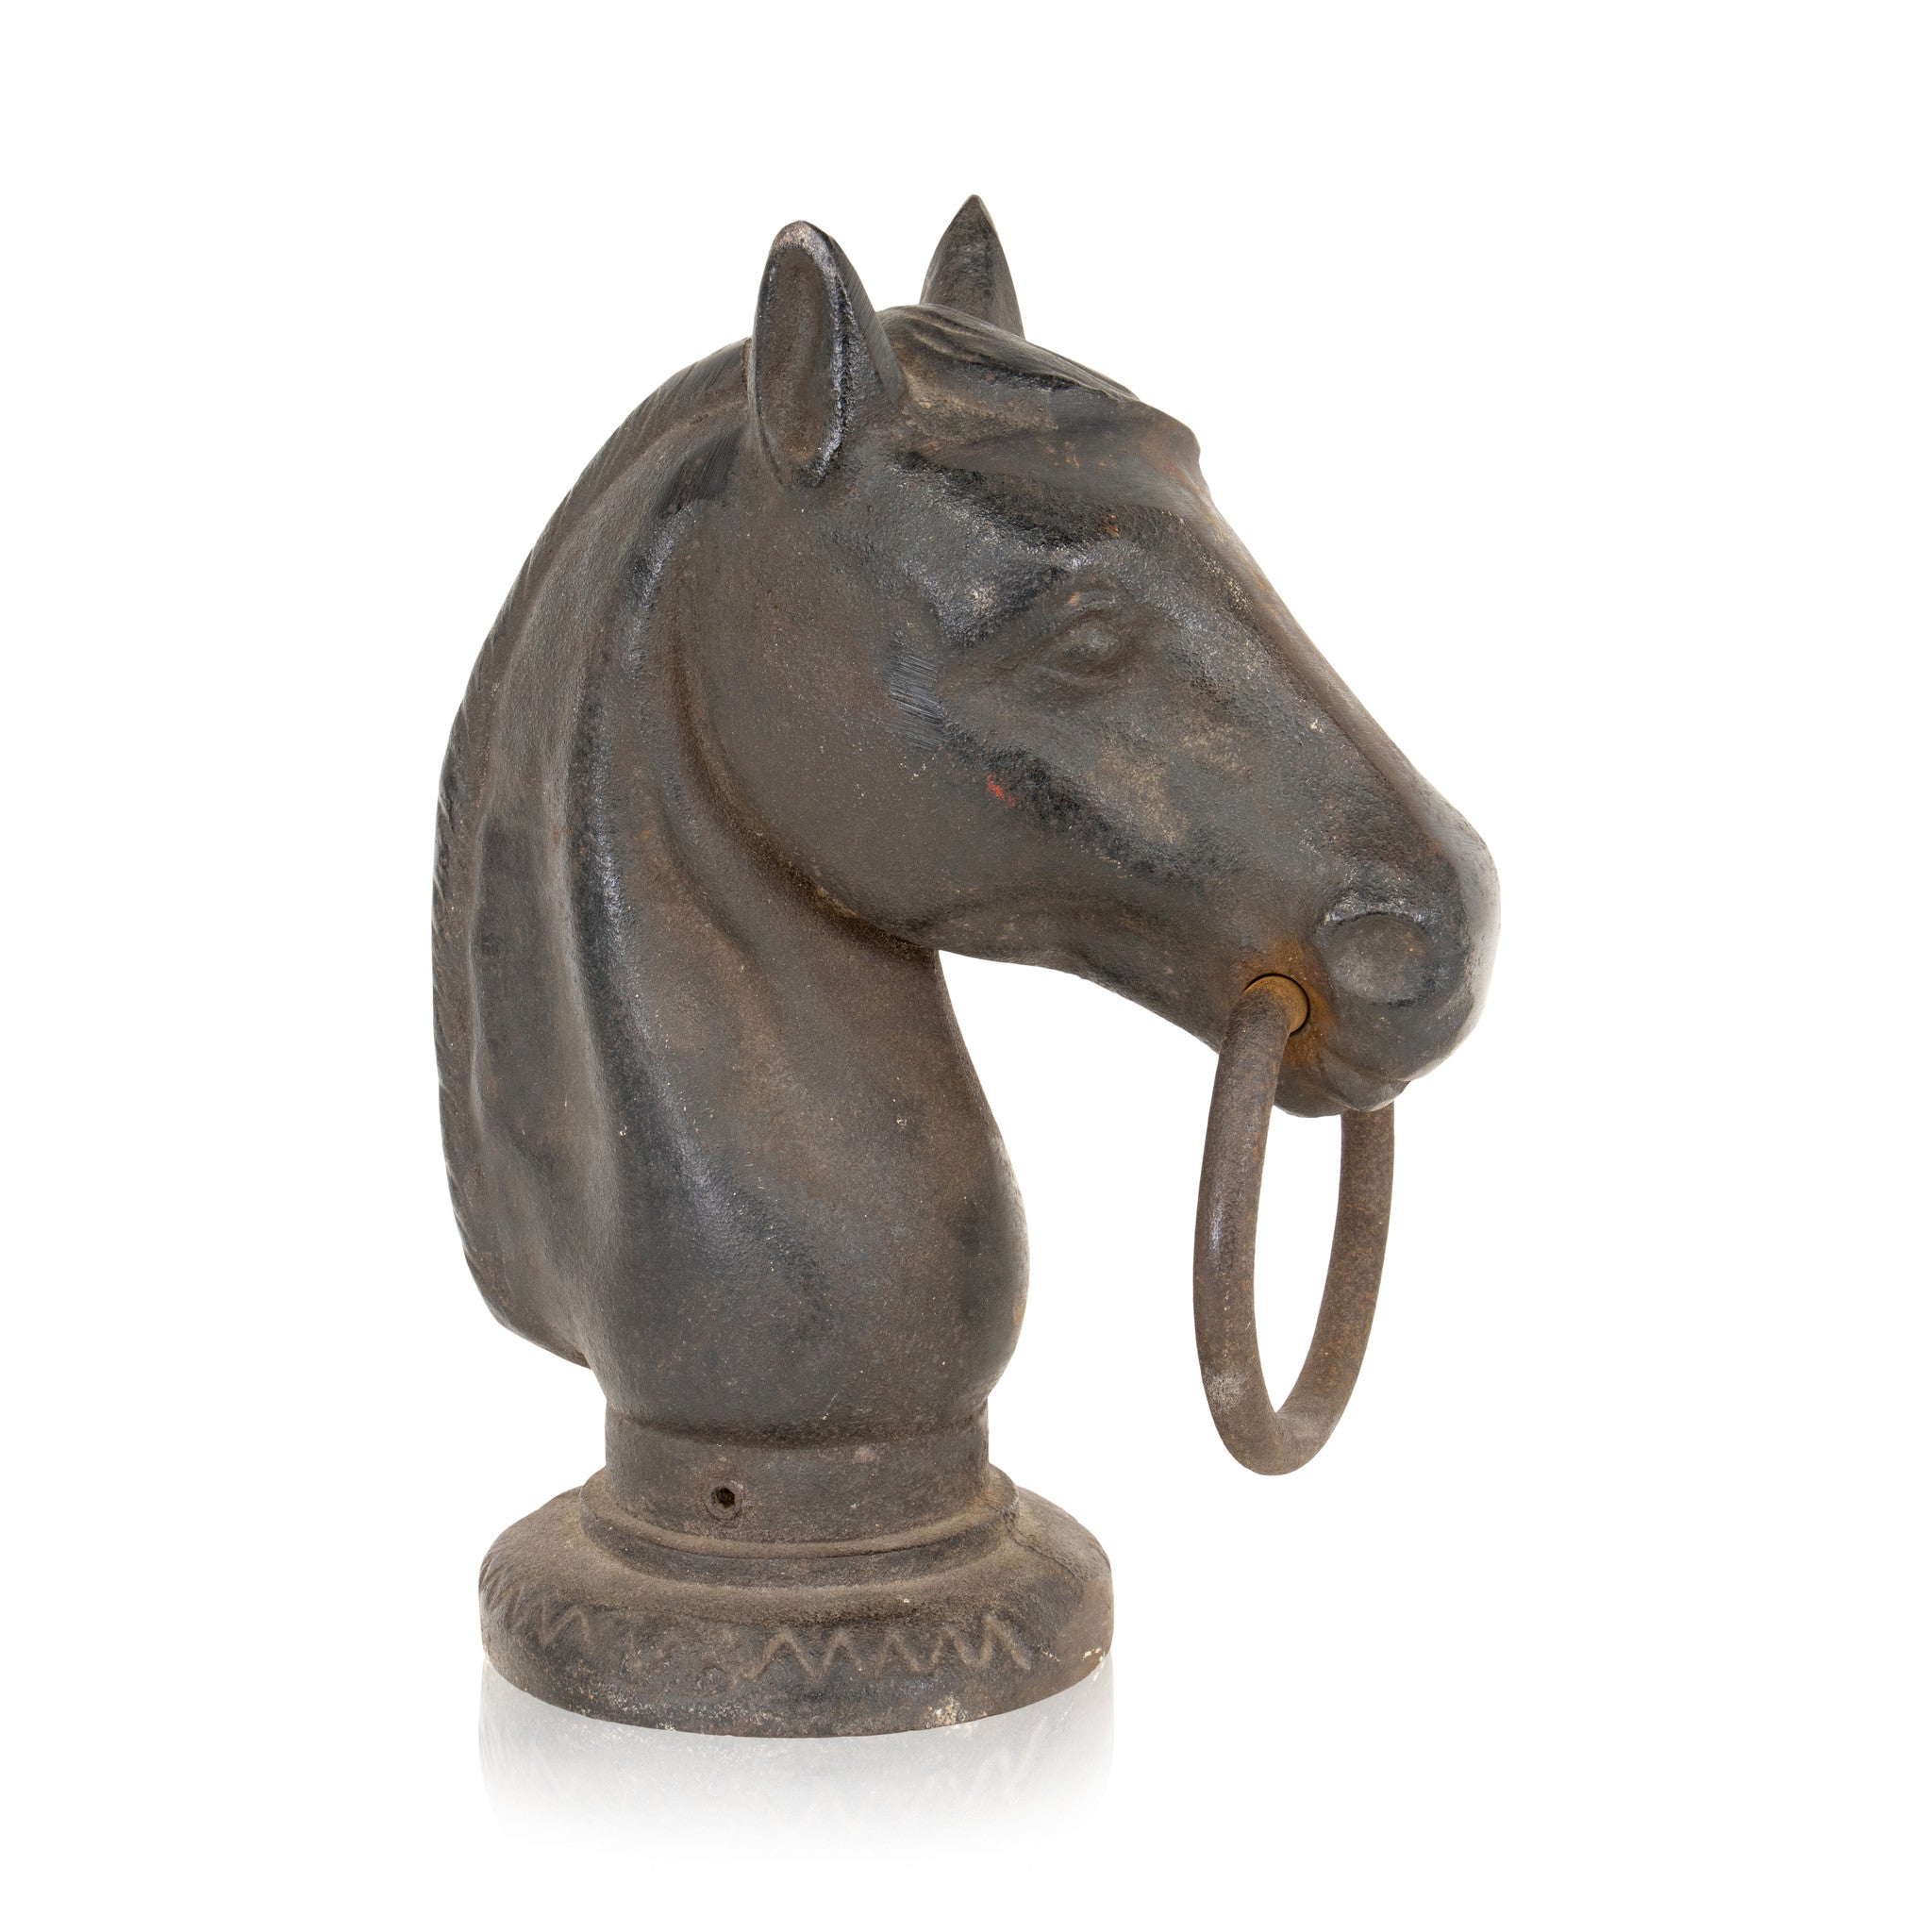 Horse Head Hitching Post Top, Western, Horse Gear, Hitching Post